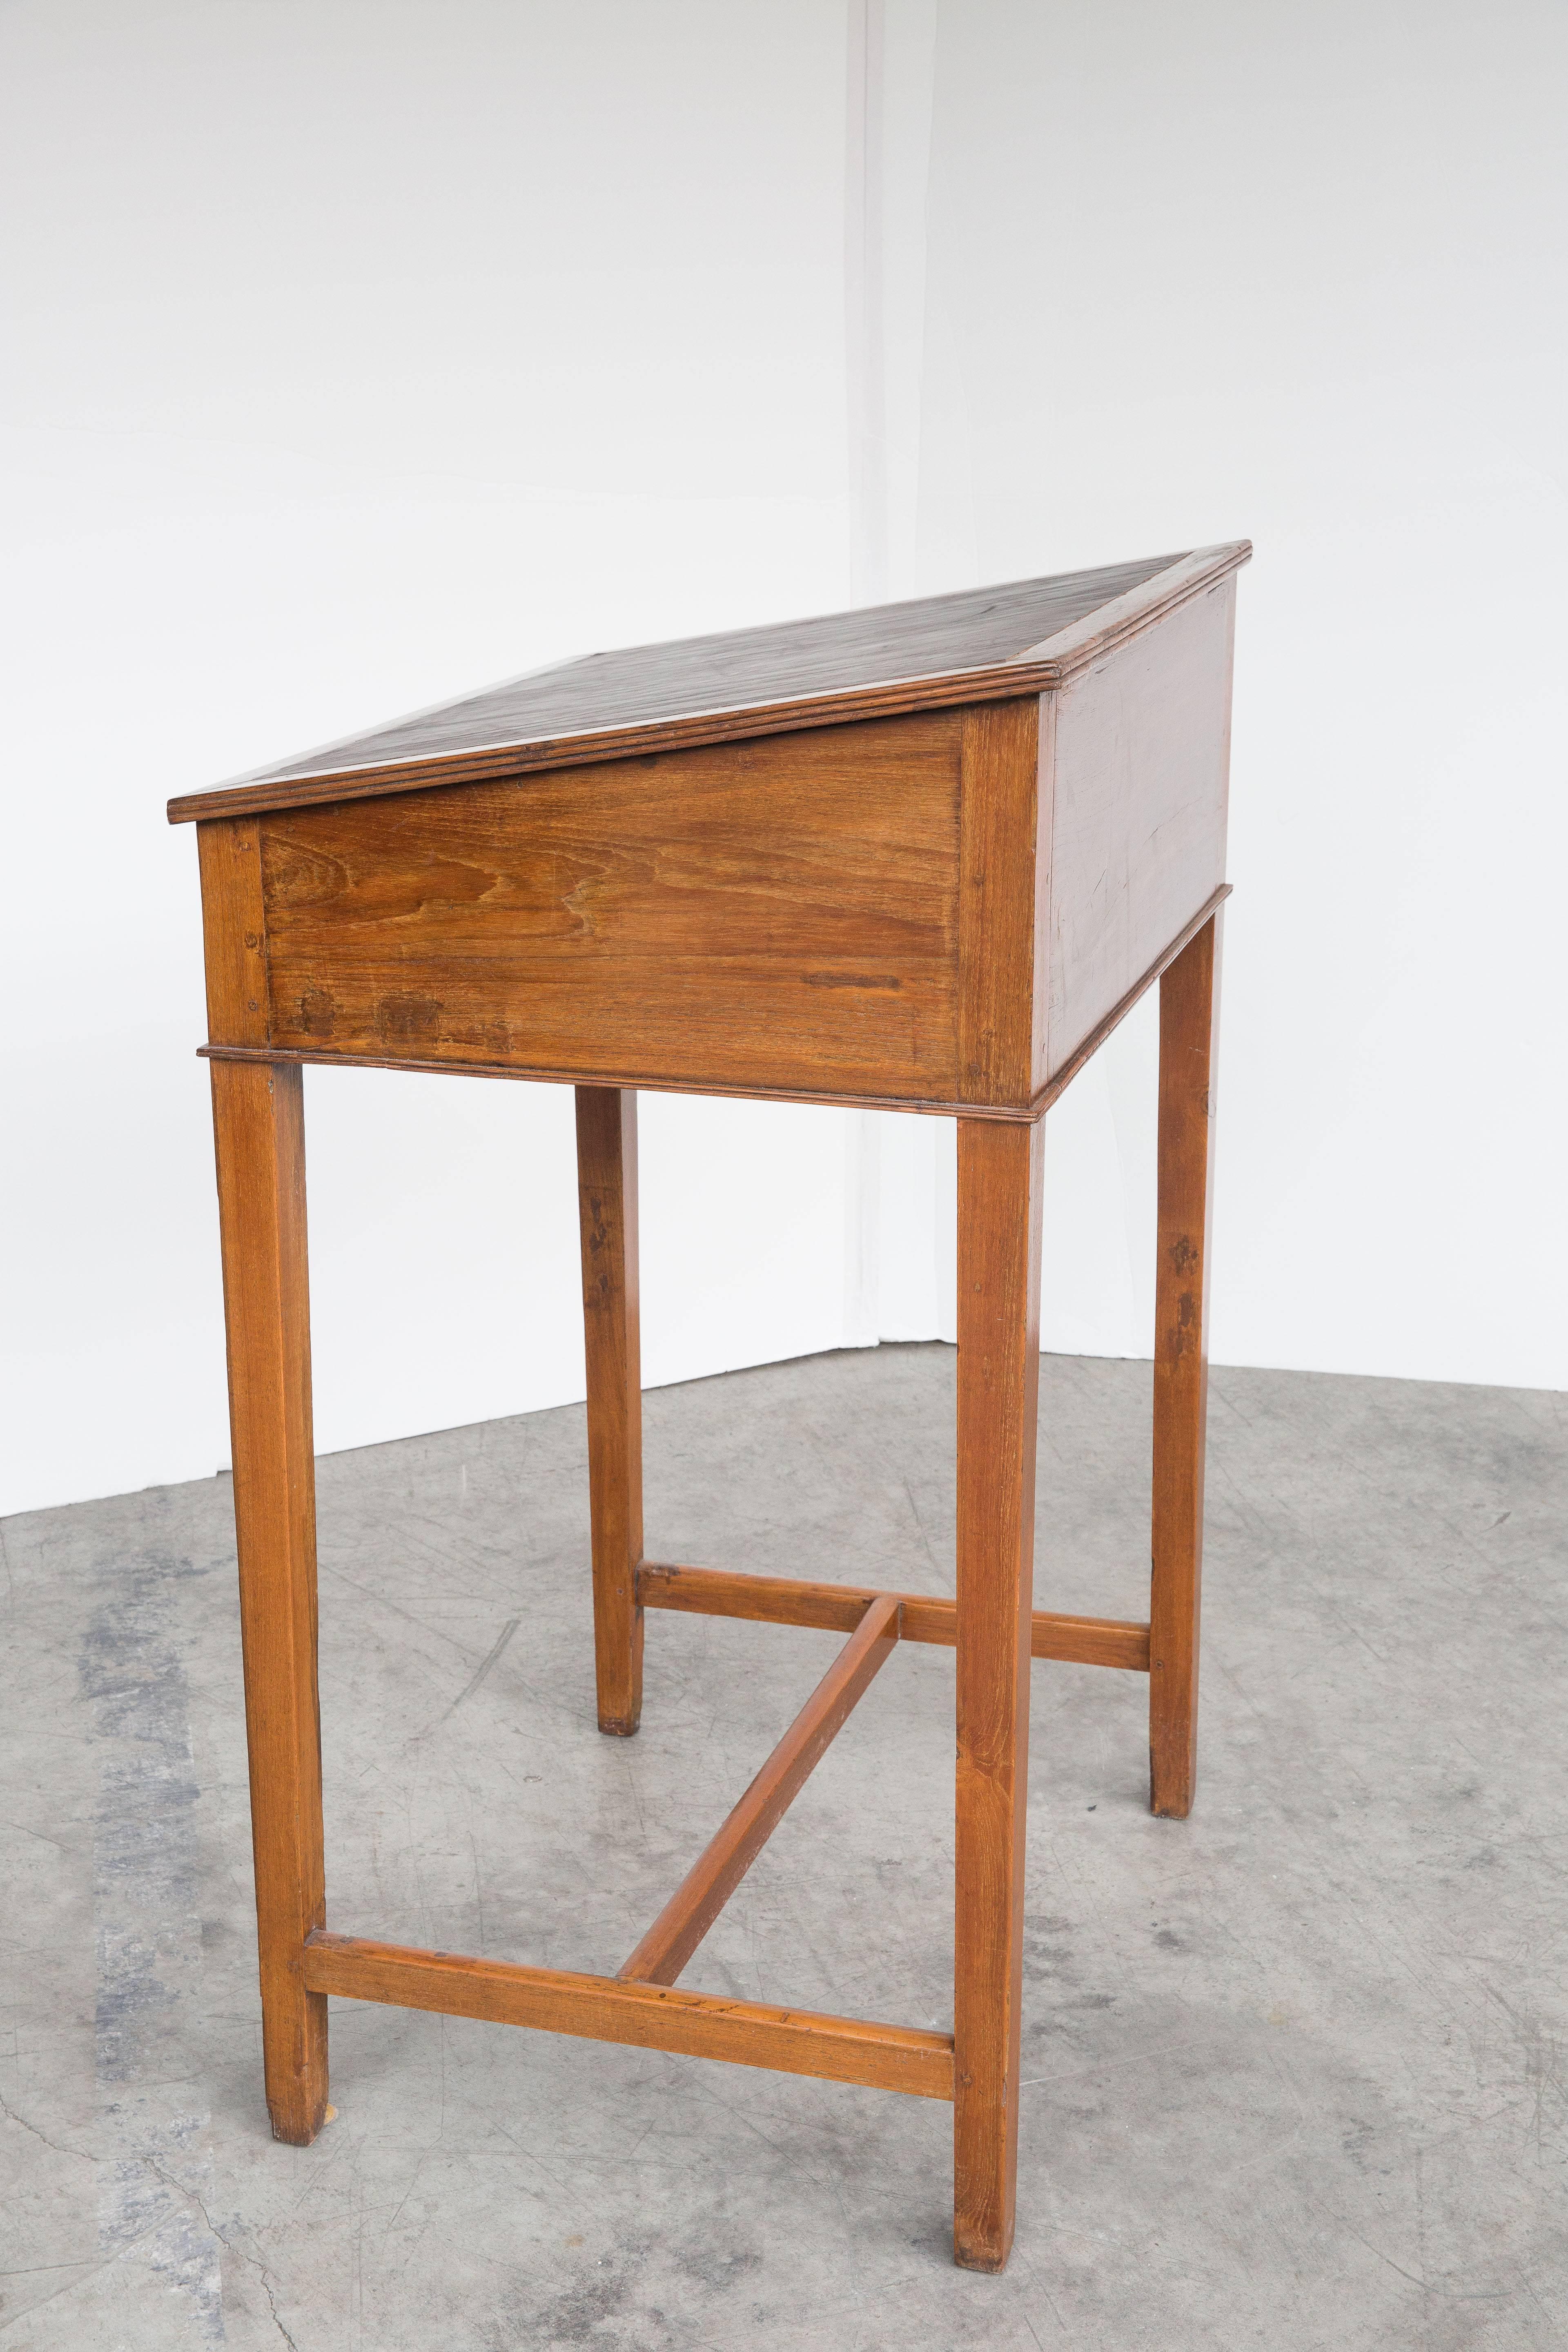 Anglo-Indian tall scribes desk made of solid teak. Top lifts up to reveal compartment for document storage. Inset leather top. Perfect for a restaurant!